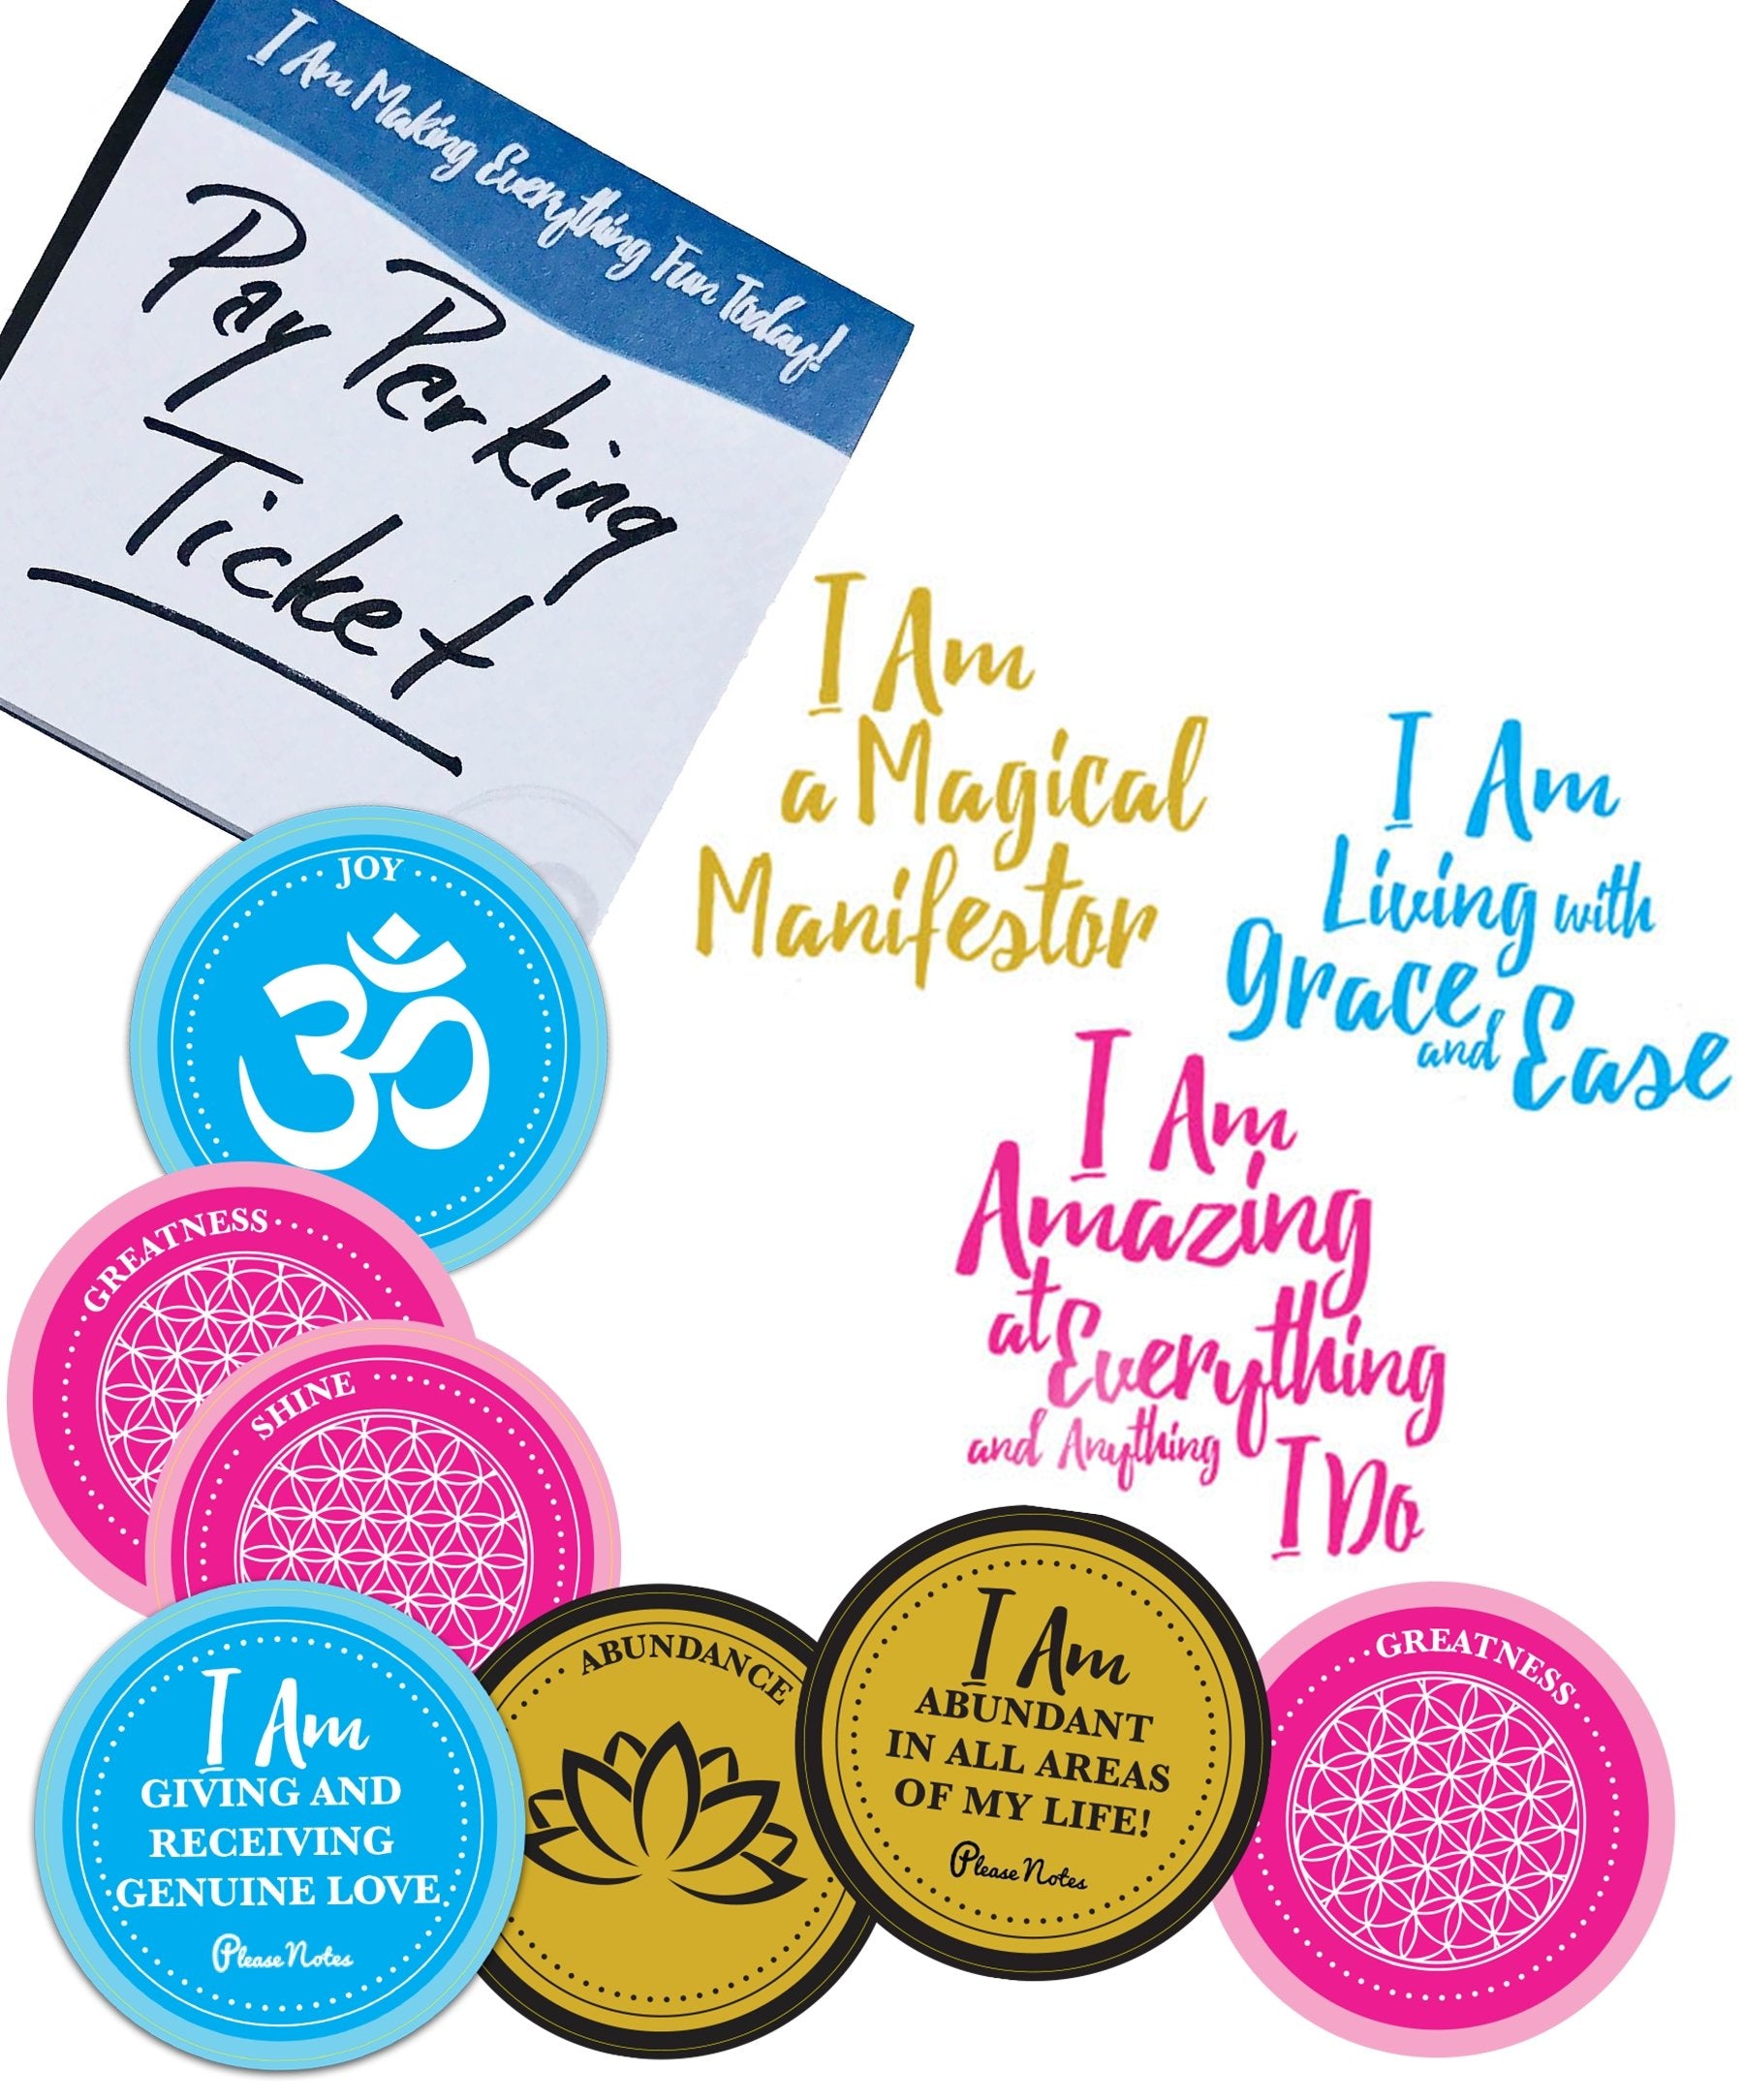 Notables - Affirmation-Filled Gifts | PleaseNotes